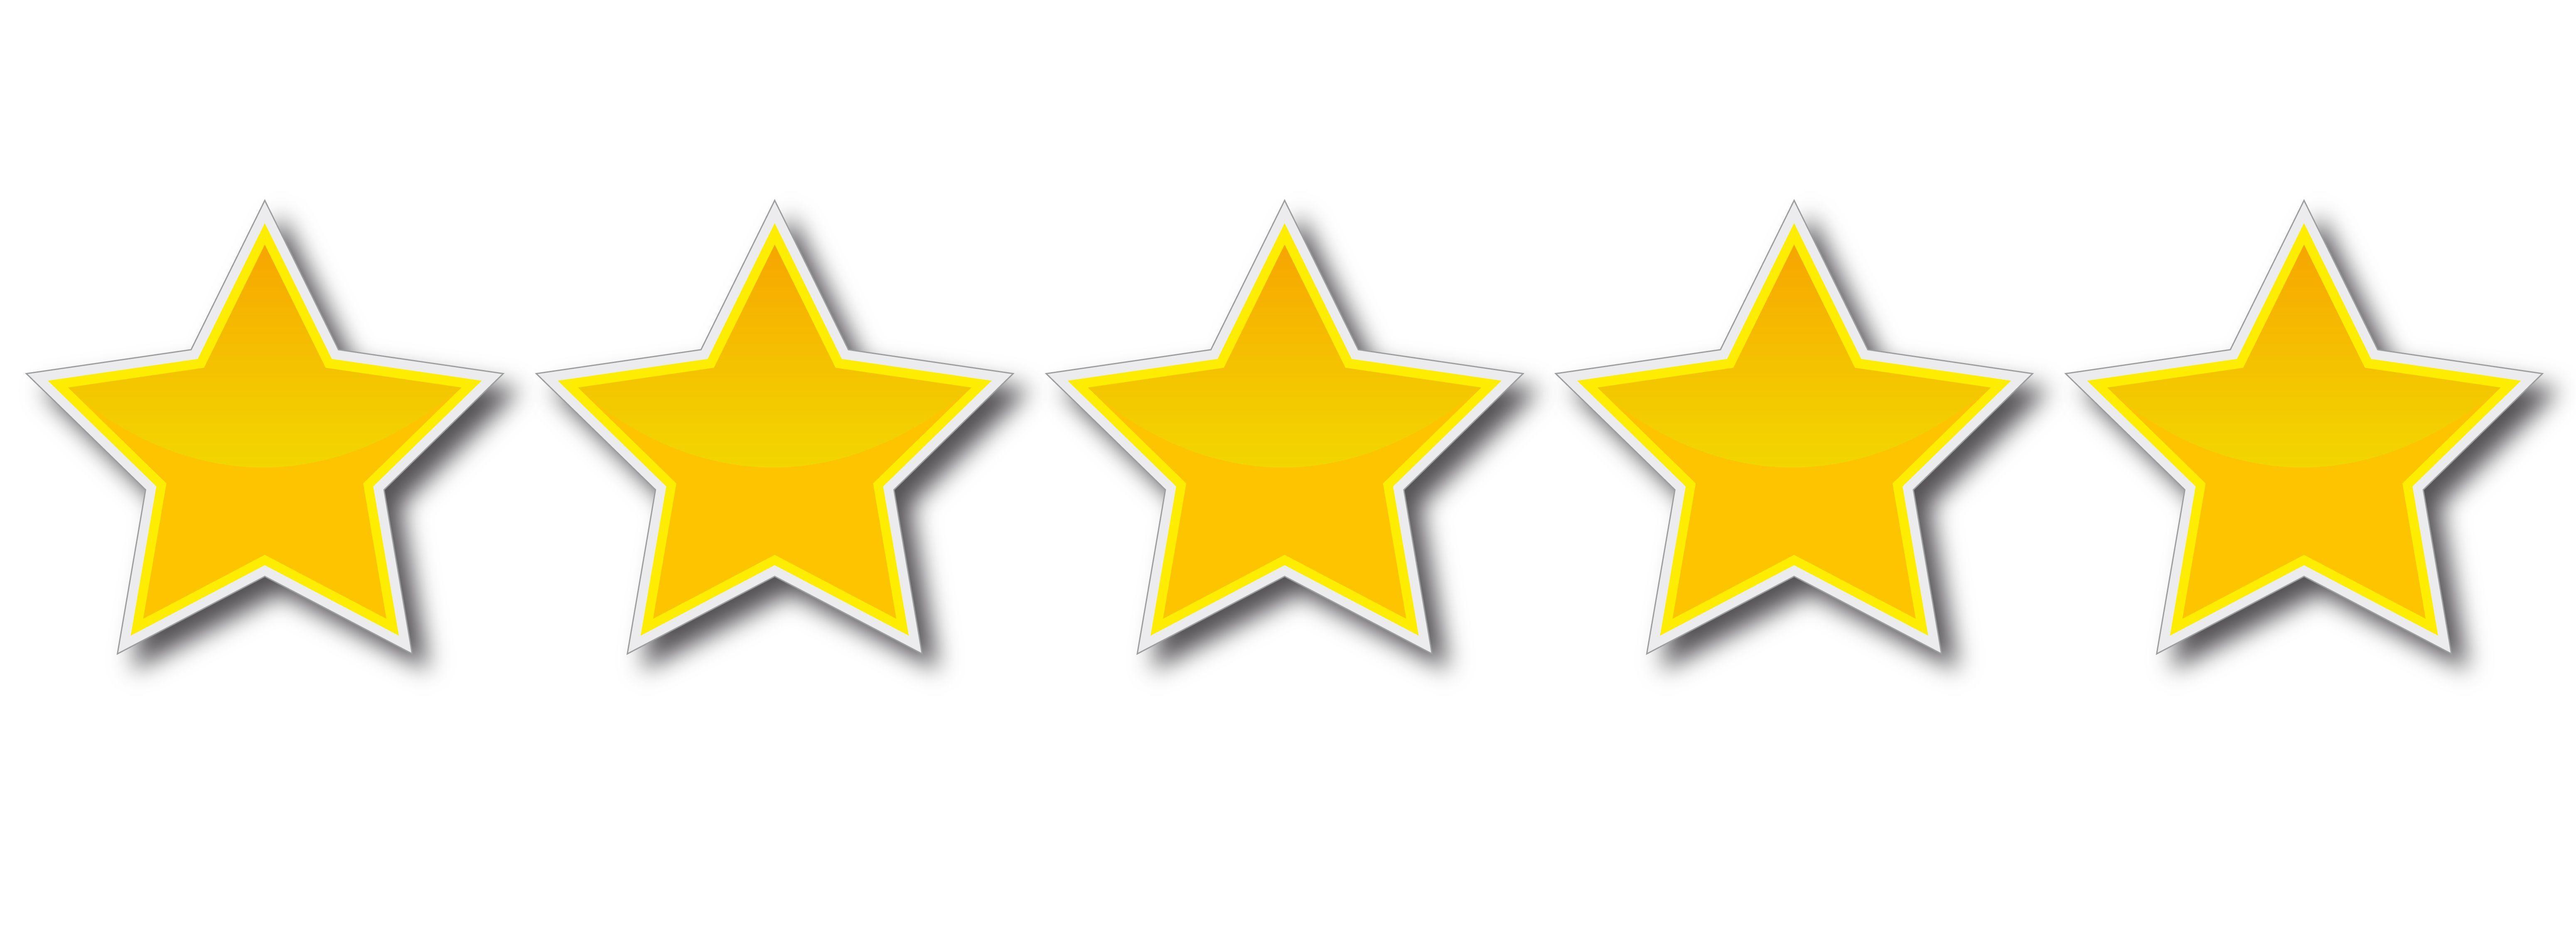 Amazon 5 Star Review Logo - 5 STAR Reviews for Write-Brain on Amazon.com | Continuing education ...